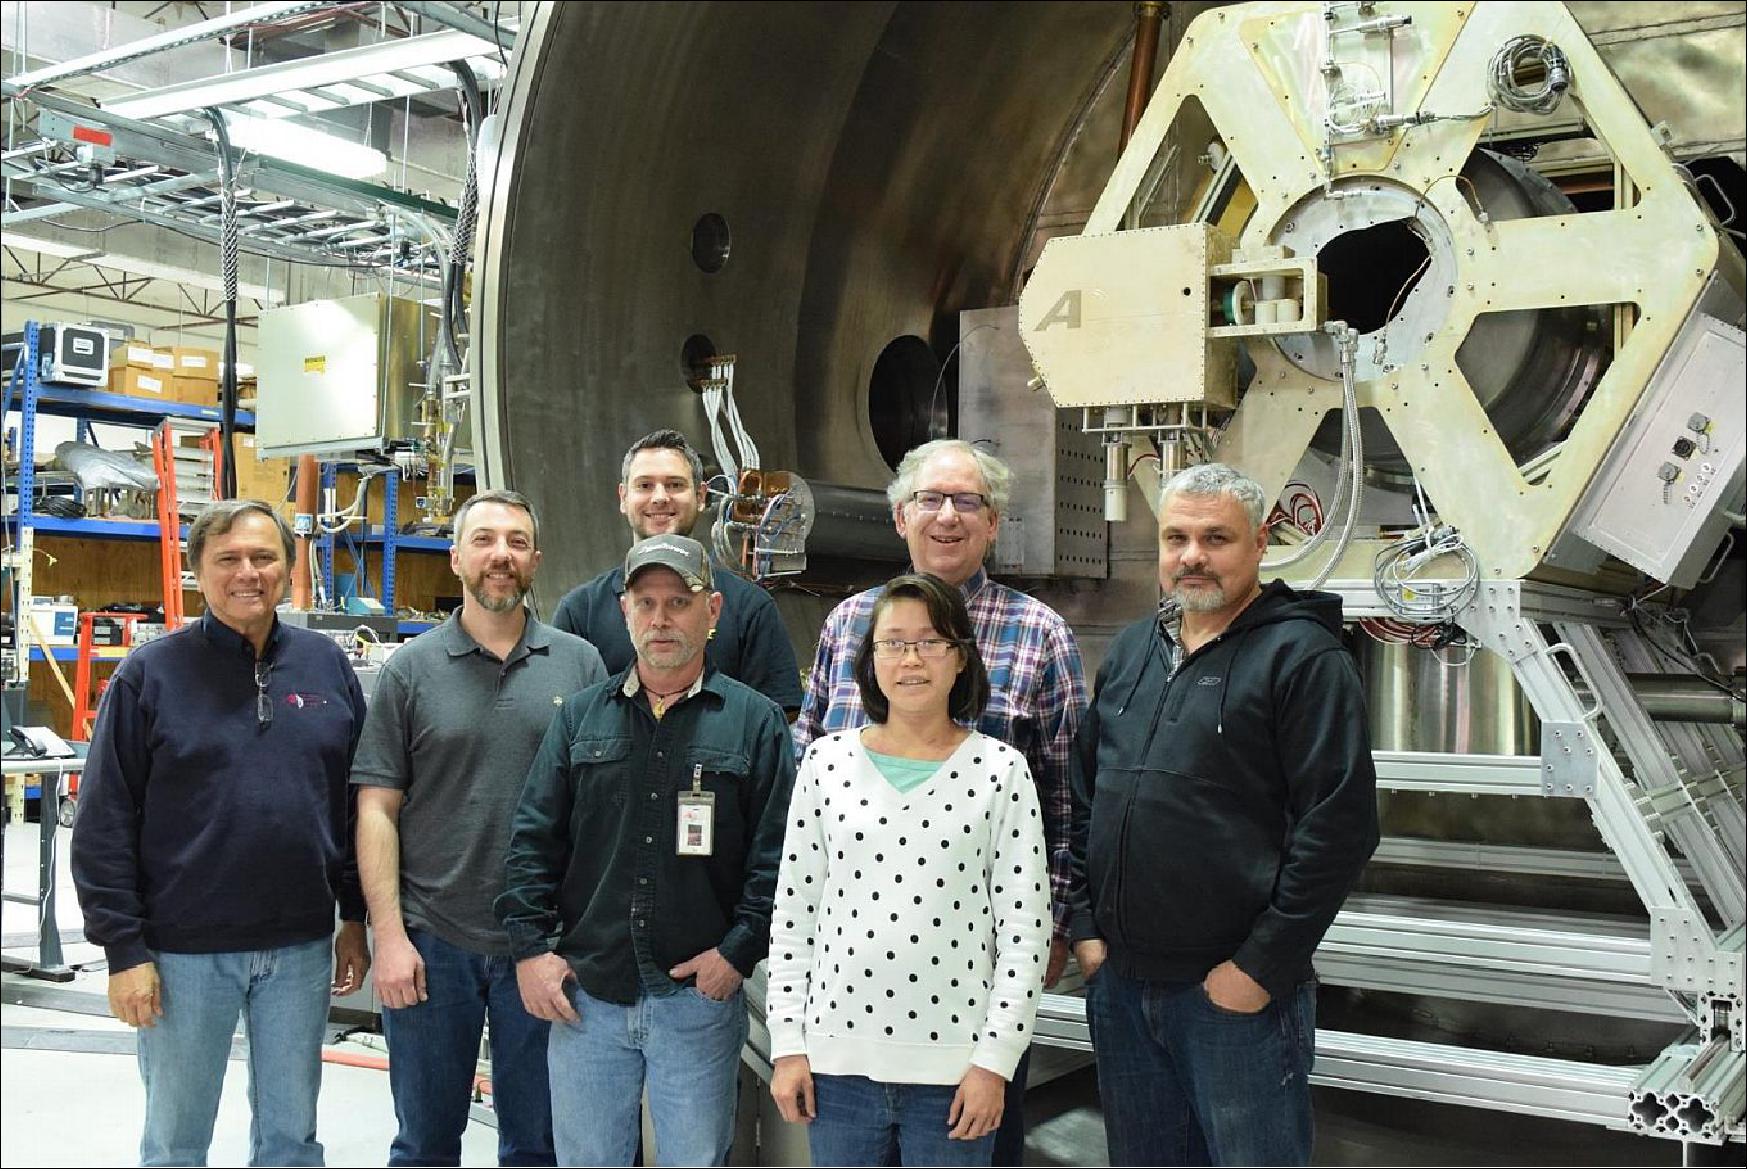 Figure 6: Some of the Ad Astra team members who supported the RF-PPU testing pose in front of the open vacuum chamber at the company's Texas facility. The RF-PPU and part of the test hardware can be seen in background (upper center). The main VX-200SS test article fills the upper right portion of the image (image credit: Ad Astra Rocket Company)